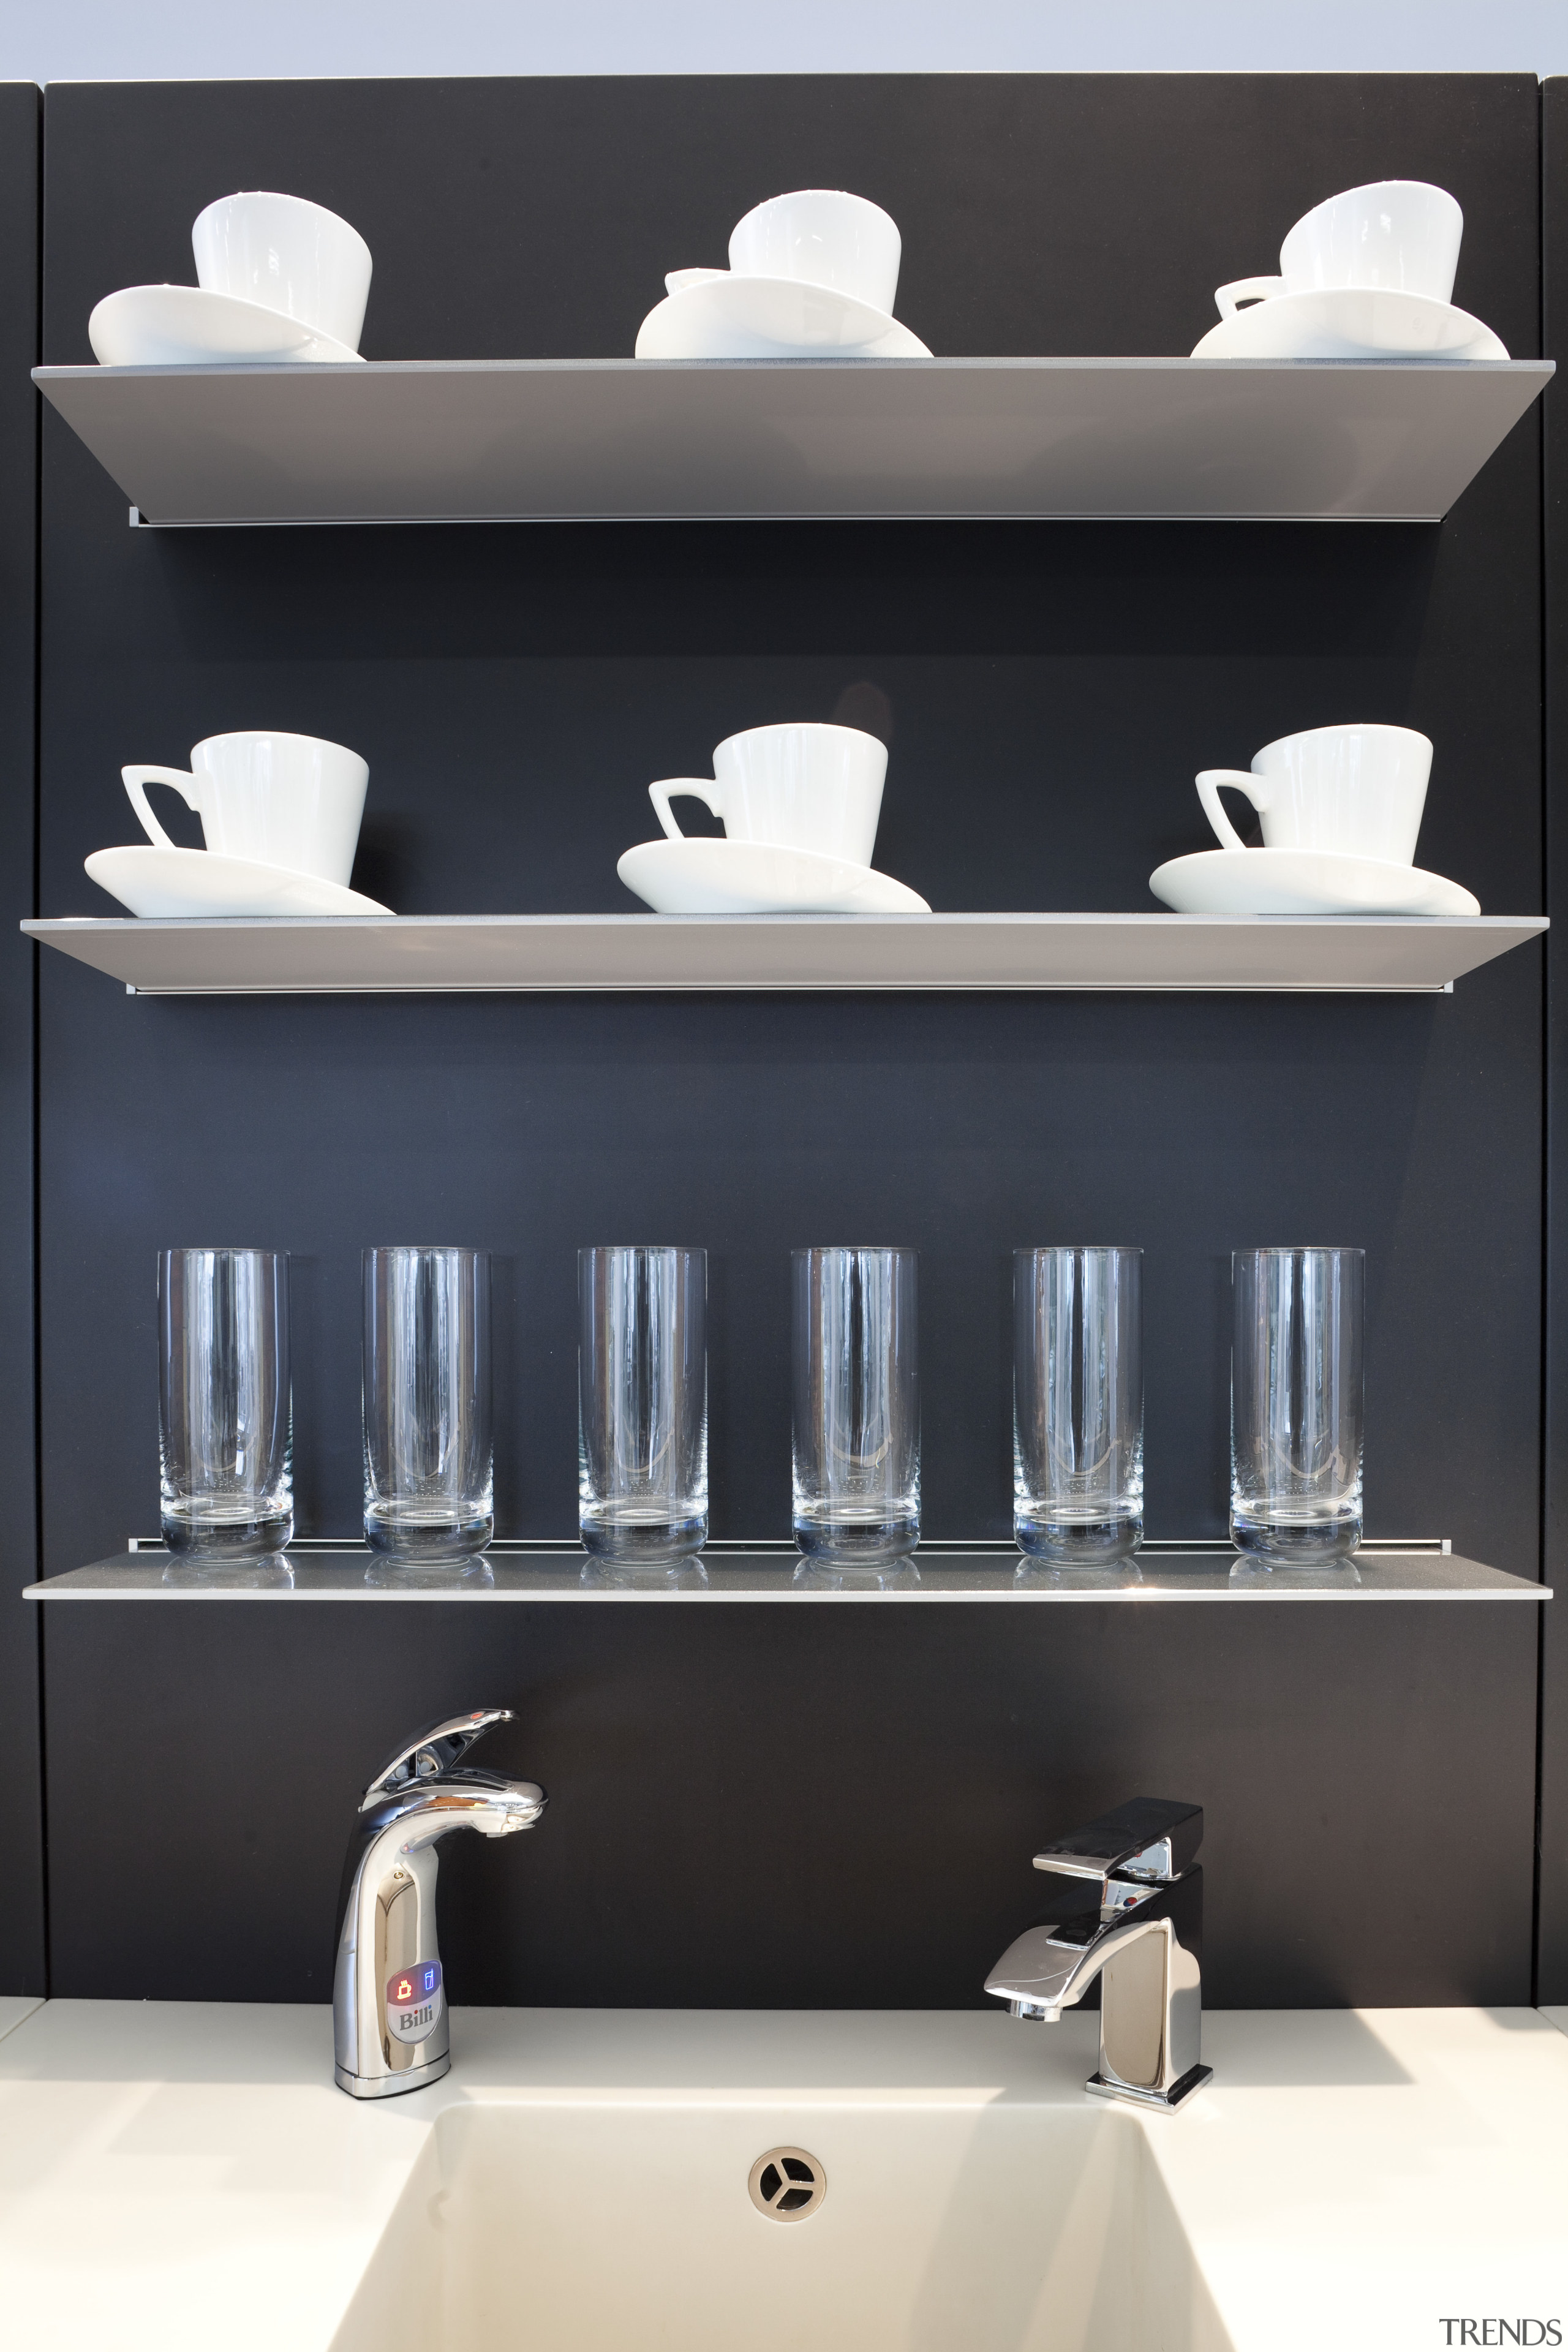 Seen here is a drinking-water system designed by bathroom, bathroom accessory, bathroom cabinet, furniture, interior design, plumbing fixture, product design, shelf, shelving, sink, tap, wall, black, white